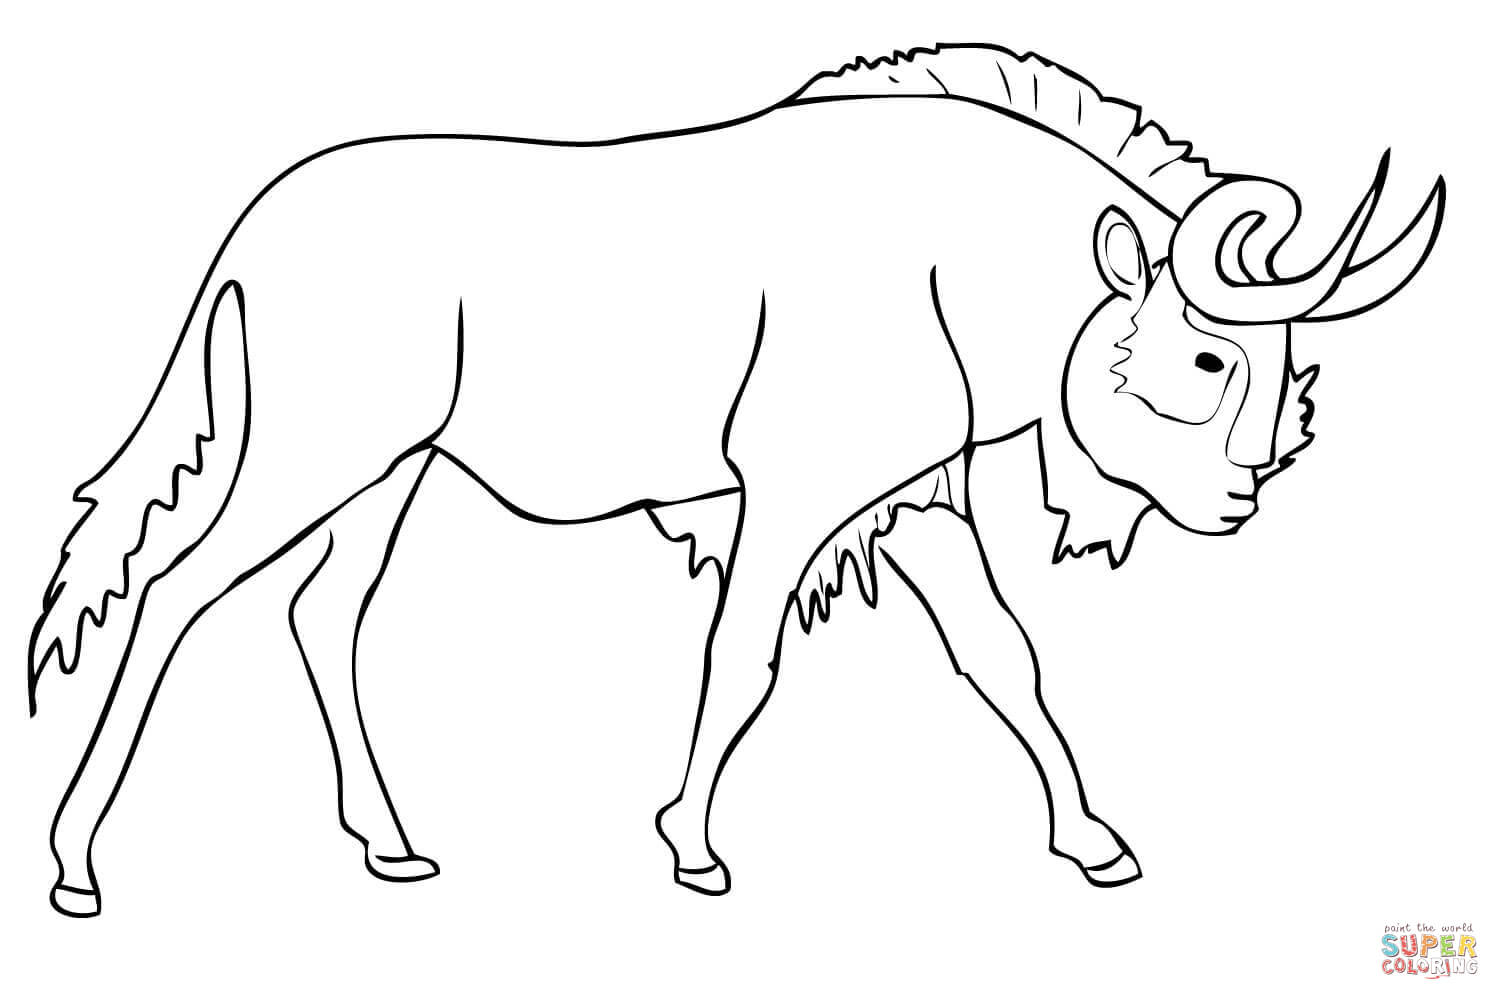 Black Wildebeest (Gnu) coloring page | Free Printable Coloring Pages